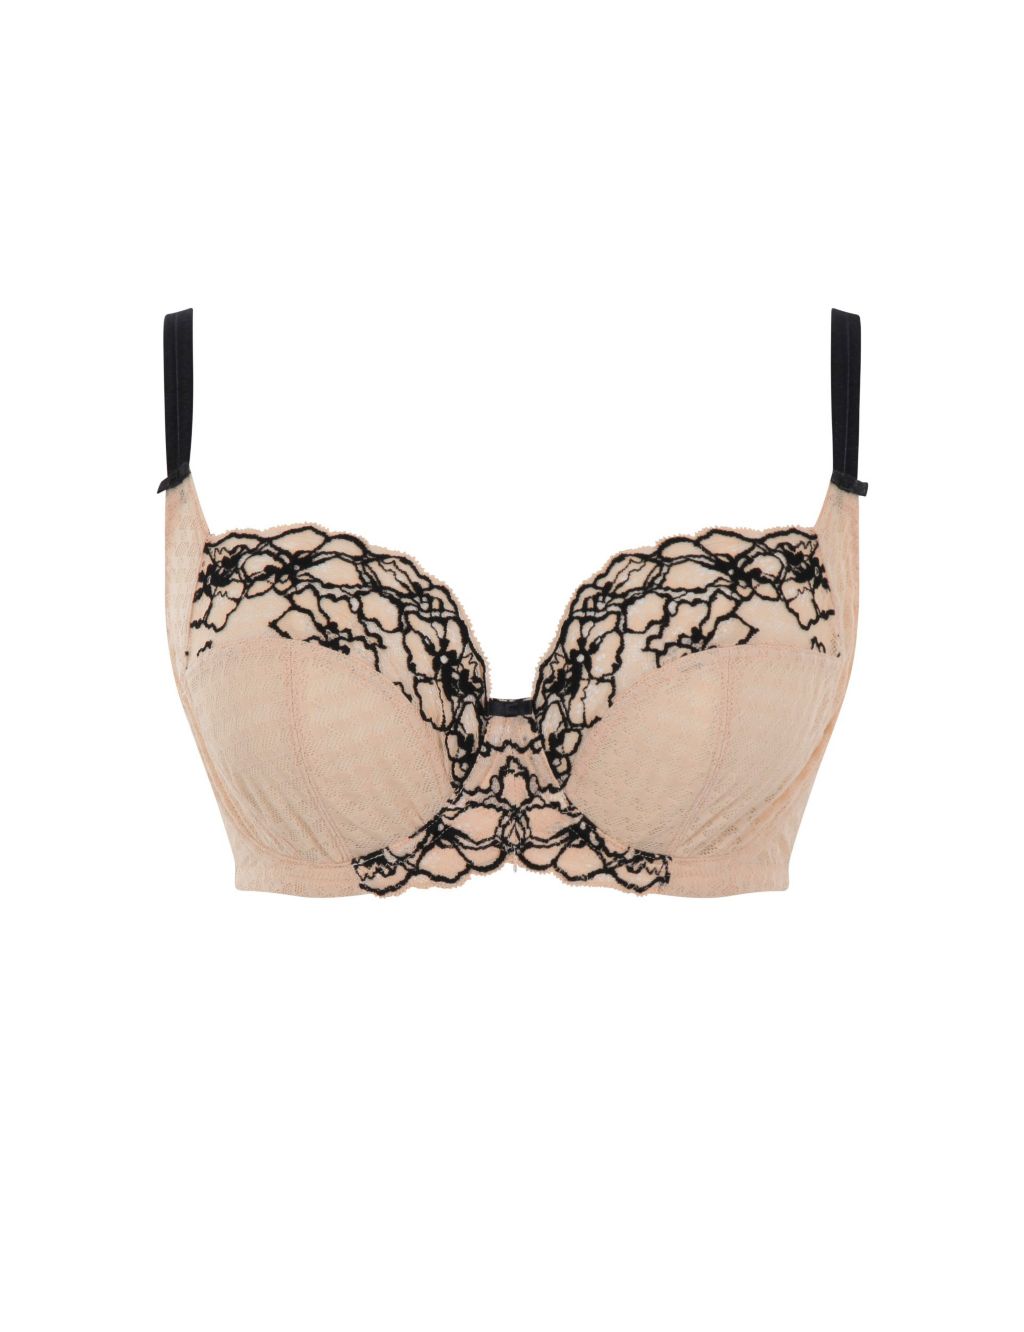 Envy Lace Trim Wired Full Cup Bra image 2